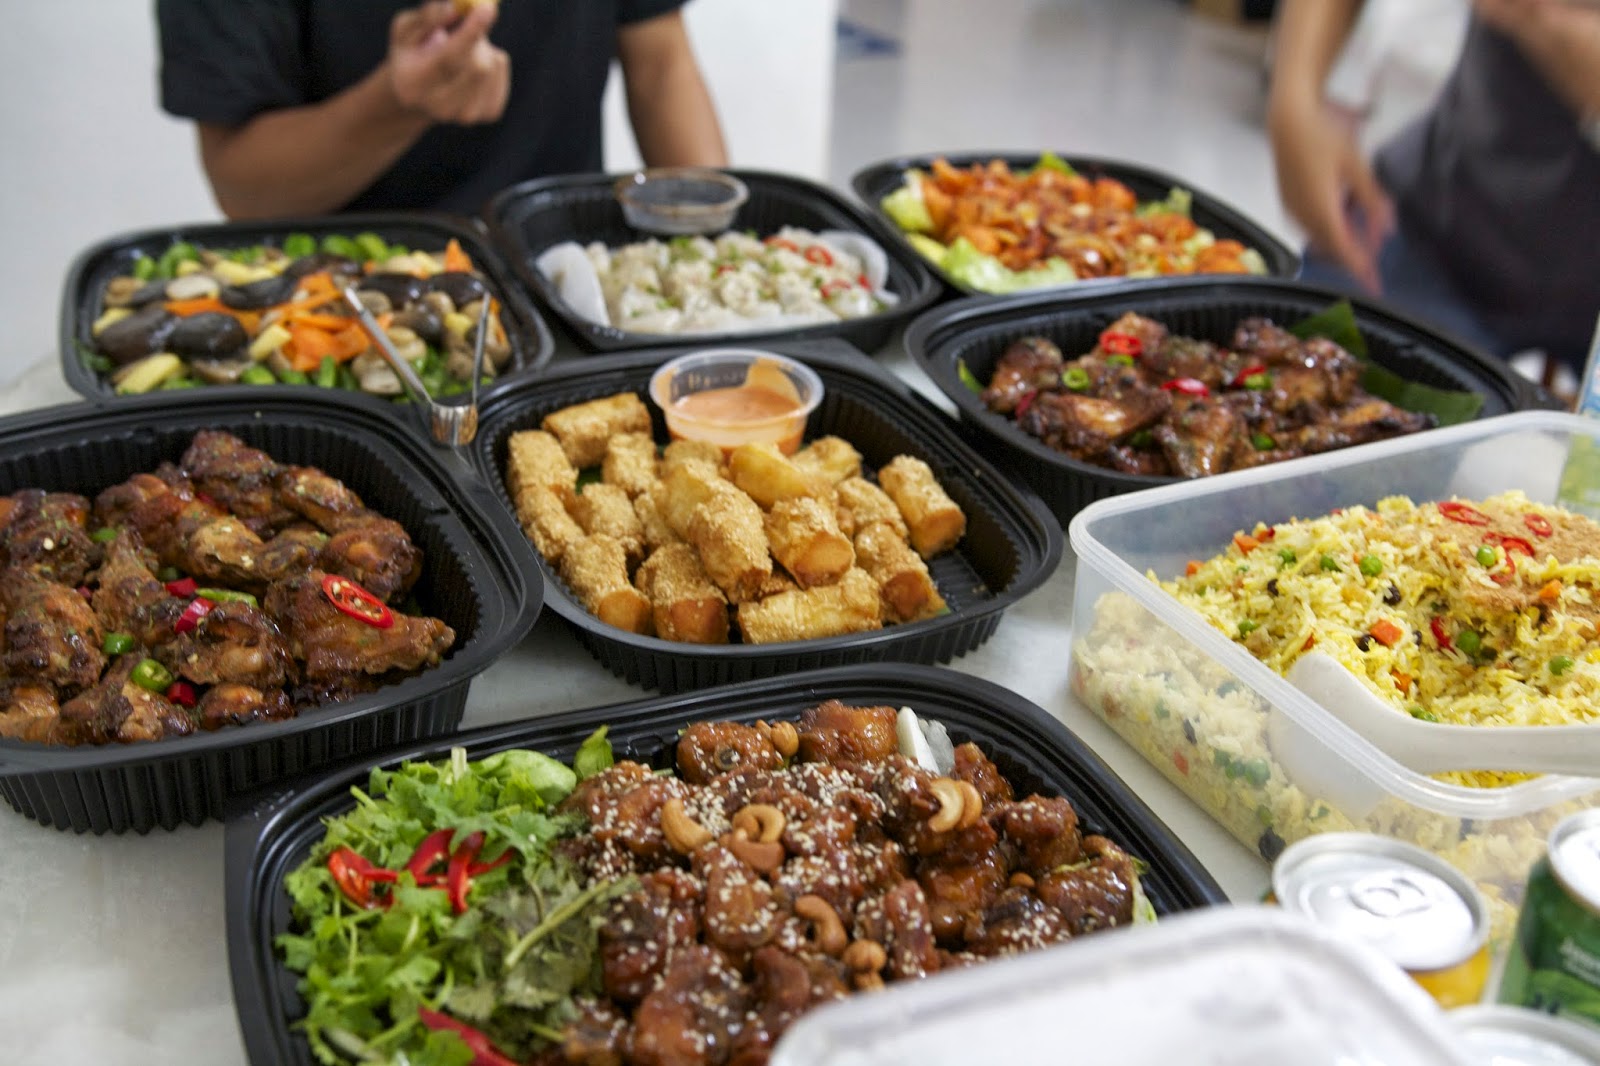 Christmas Catering Is A Breeze With These 8 GoTo Caterers In Singapore!